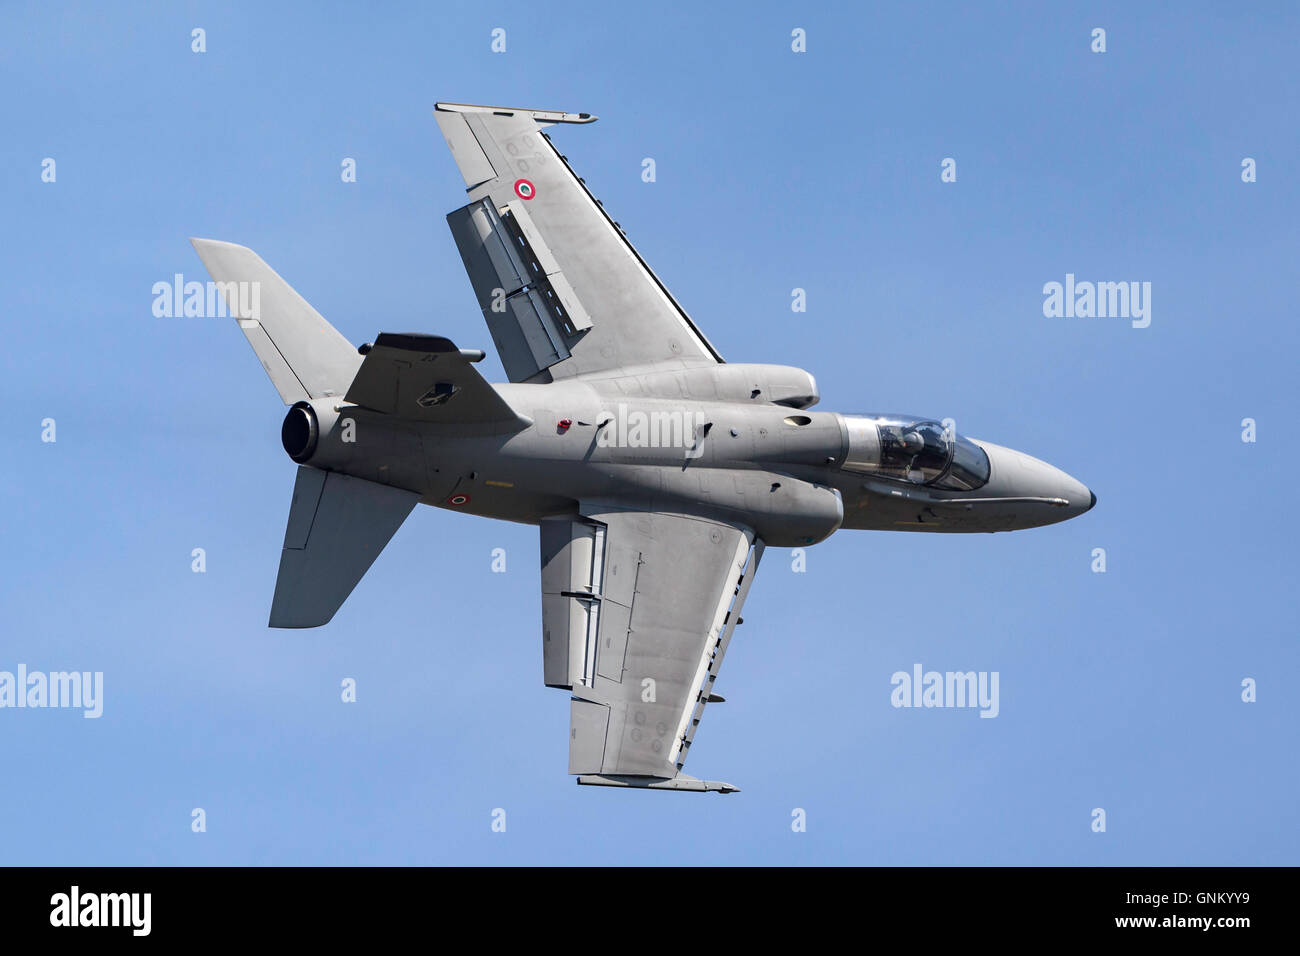 Italian Air Force Amx Is A Ground-Attack Aircraft For Battlefield  Interdiction, Close Air Support And Reconnaissance Missions Stock Photo -  Alamy